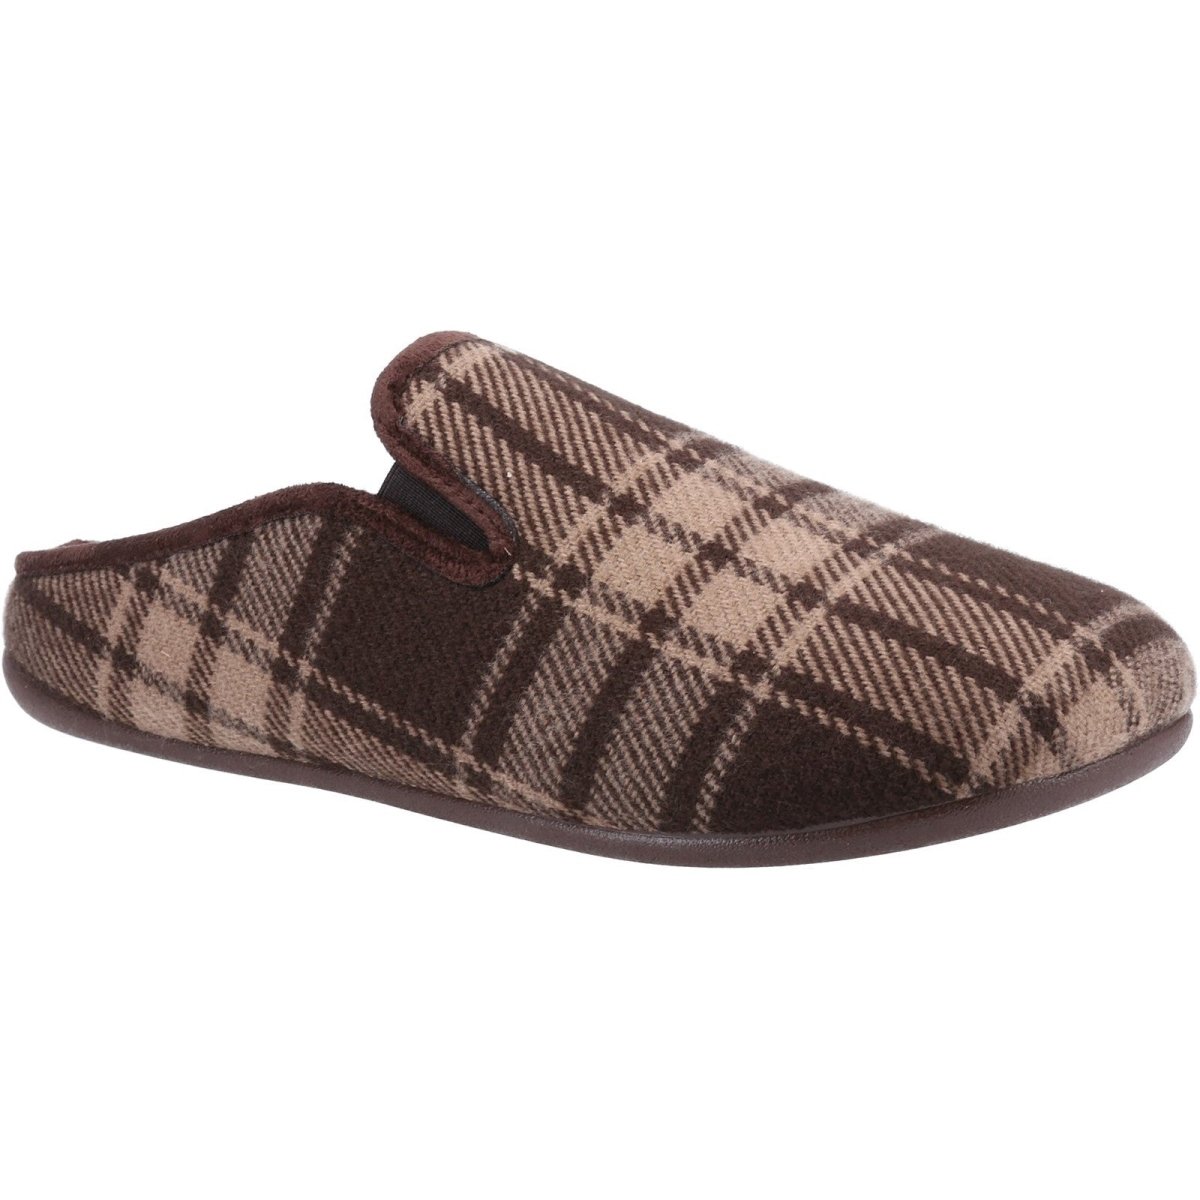 Cotswold Syde Chequered Slip-On Mens Mule Slippers - Shoe Store Direct